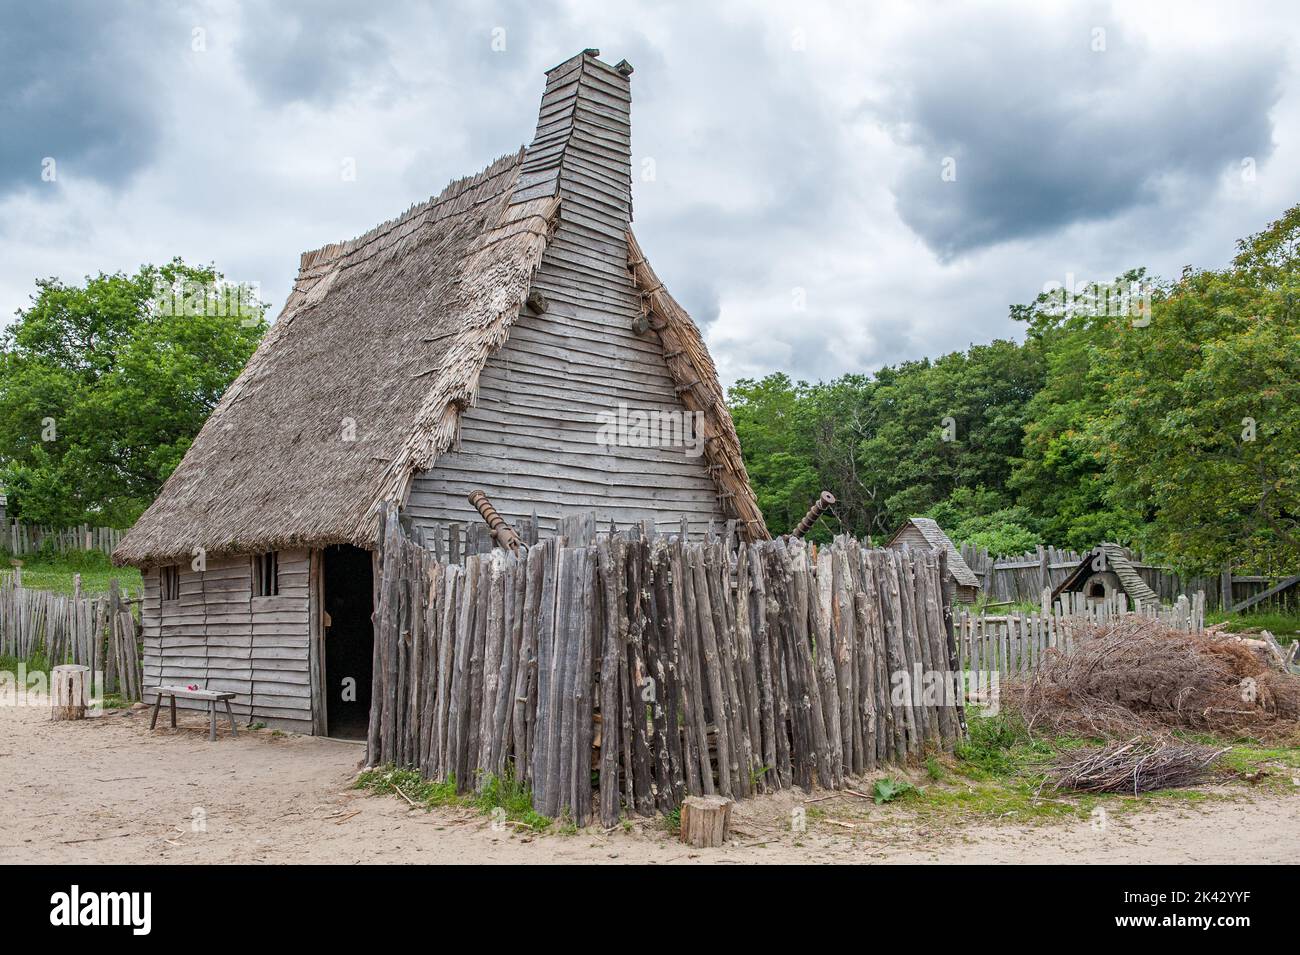 Plimoth Patuxet replicates the original settlement of the Pilgrims at Plymouth Colony, where the first thanksgiving may have been held in 1621. Stock Photo